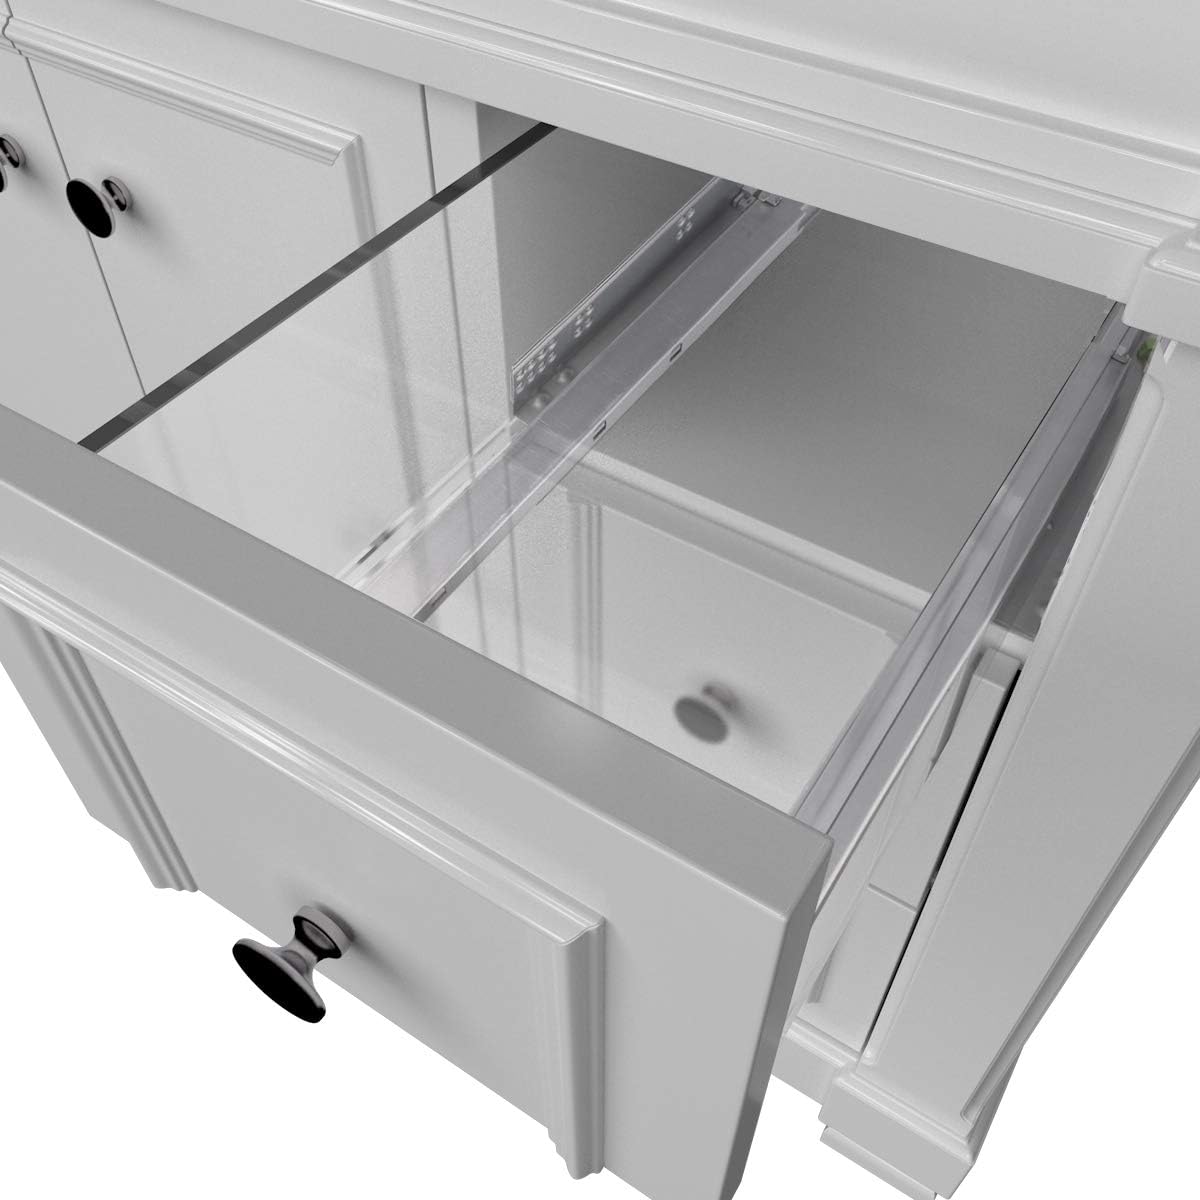 Probrico 1 Pair Self Soft Close Under/Bottom Rear Mounting Drawer Slides 18 inch Concealed Drawer Runners;Locking Devices;Rear Mounting